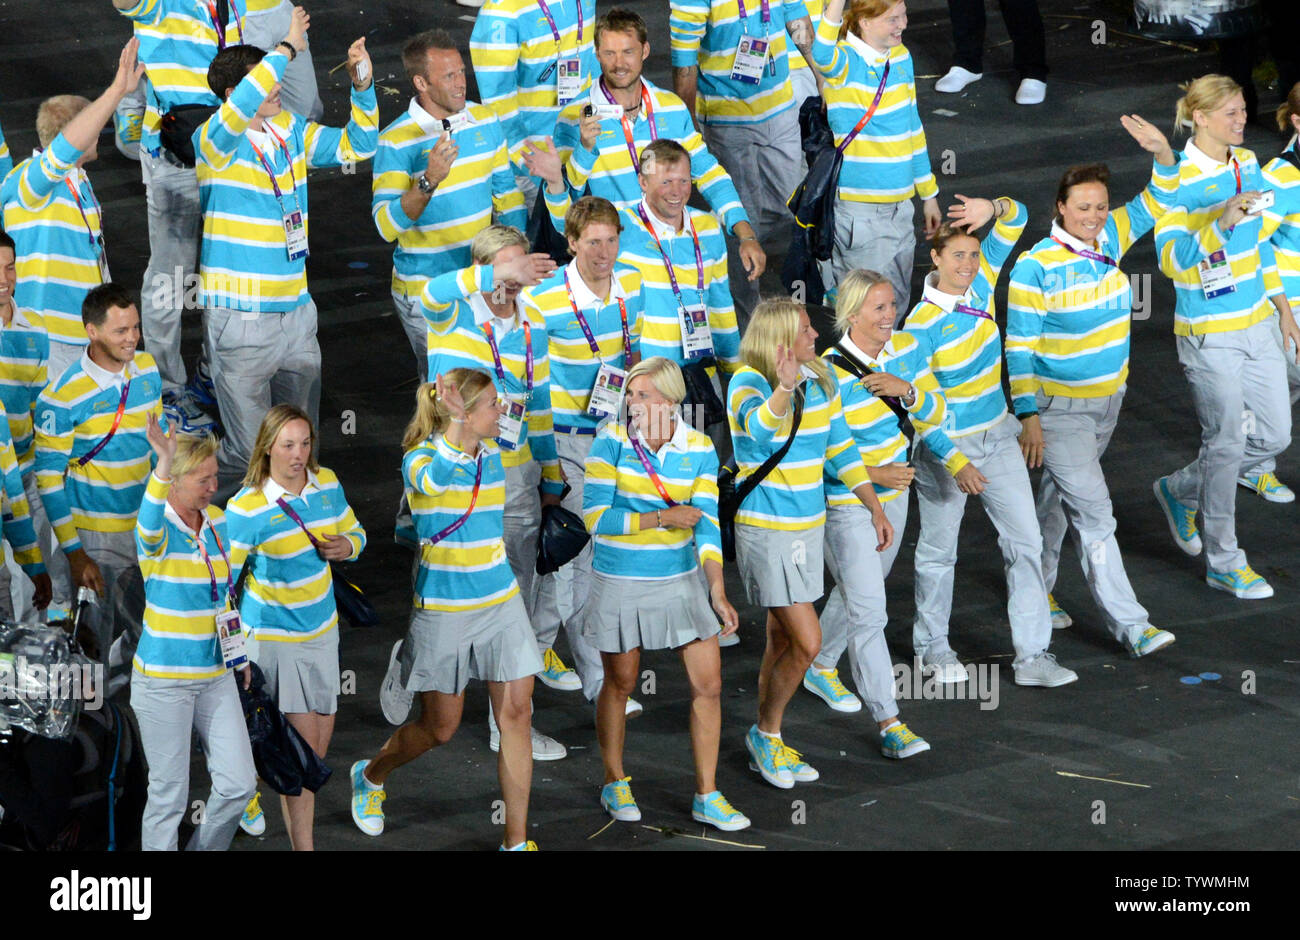 Team Sweden enters the stadium in the Parade of Nations during the Opening Ceremony of the London 2012 Summer Olympics on July 27, 2012 in Stafford, London. UPI/Pat Benic Stock Photo